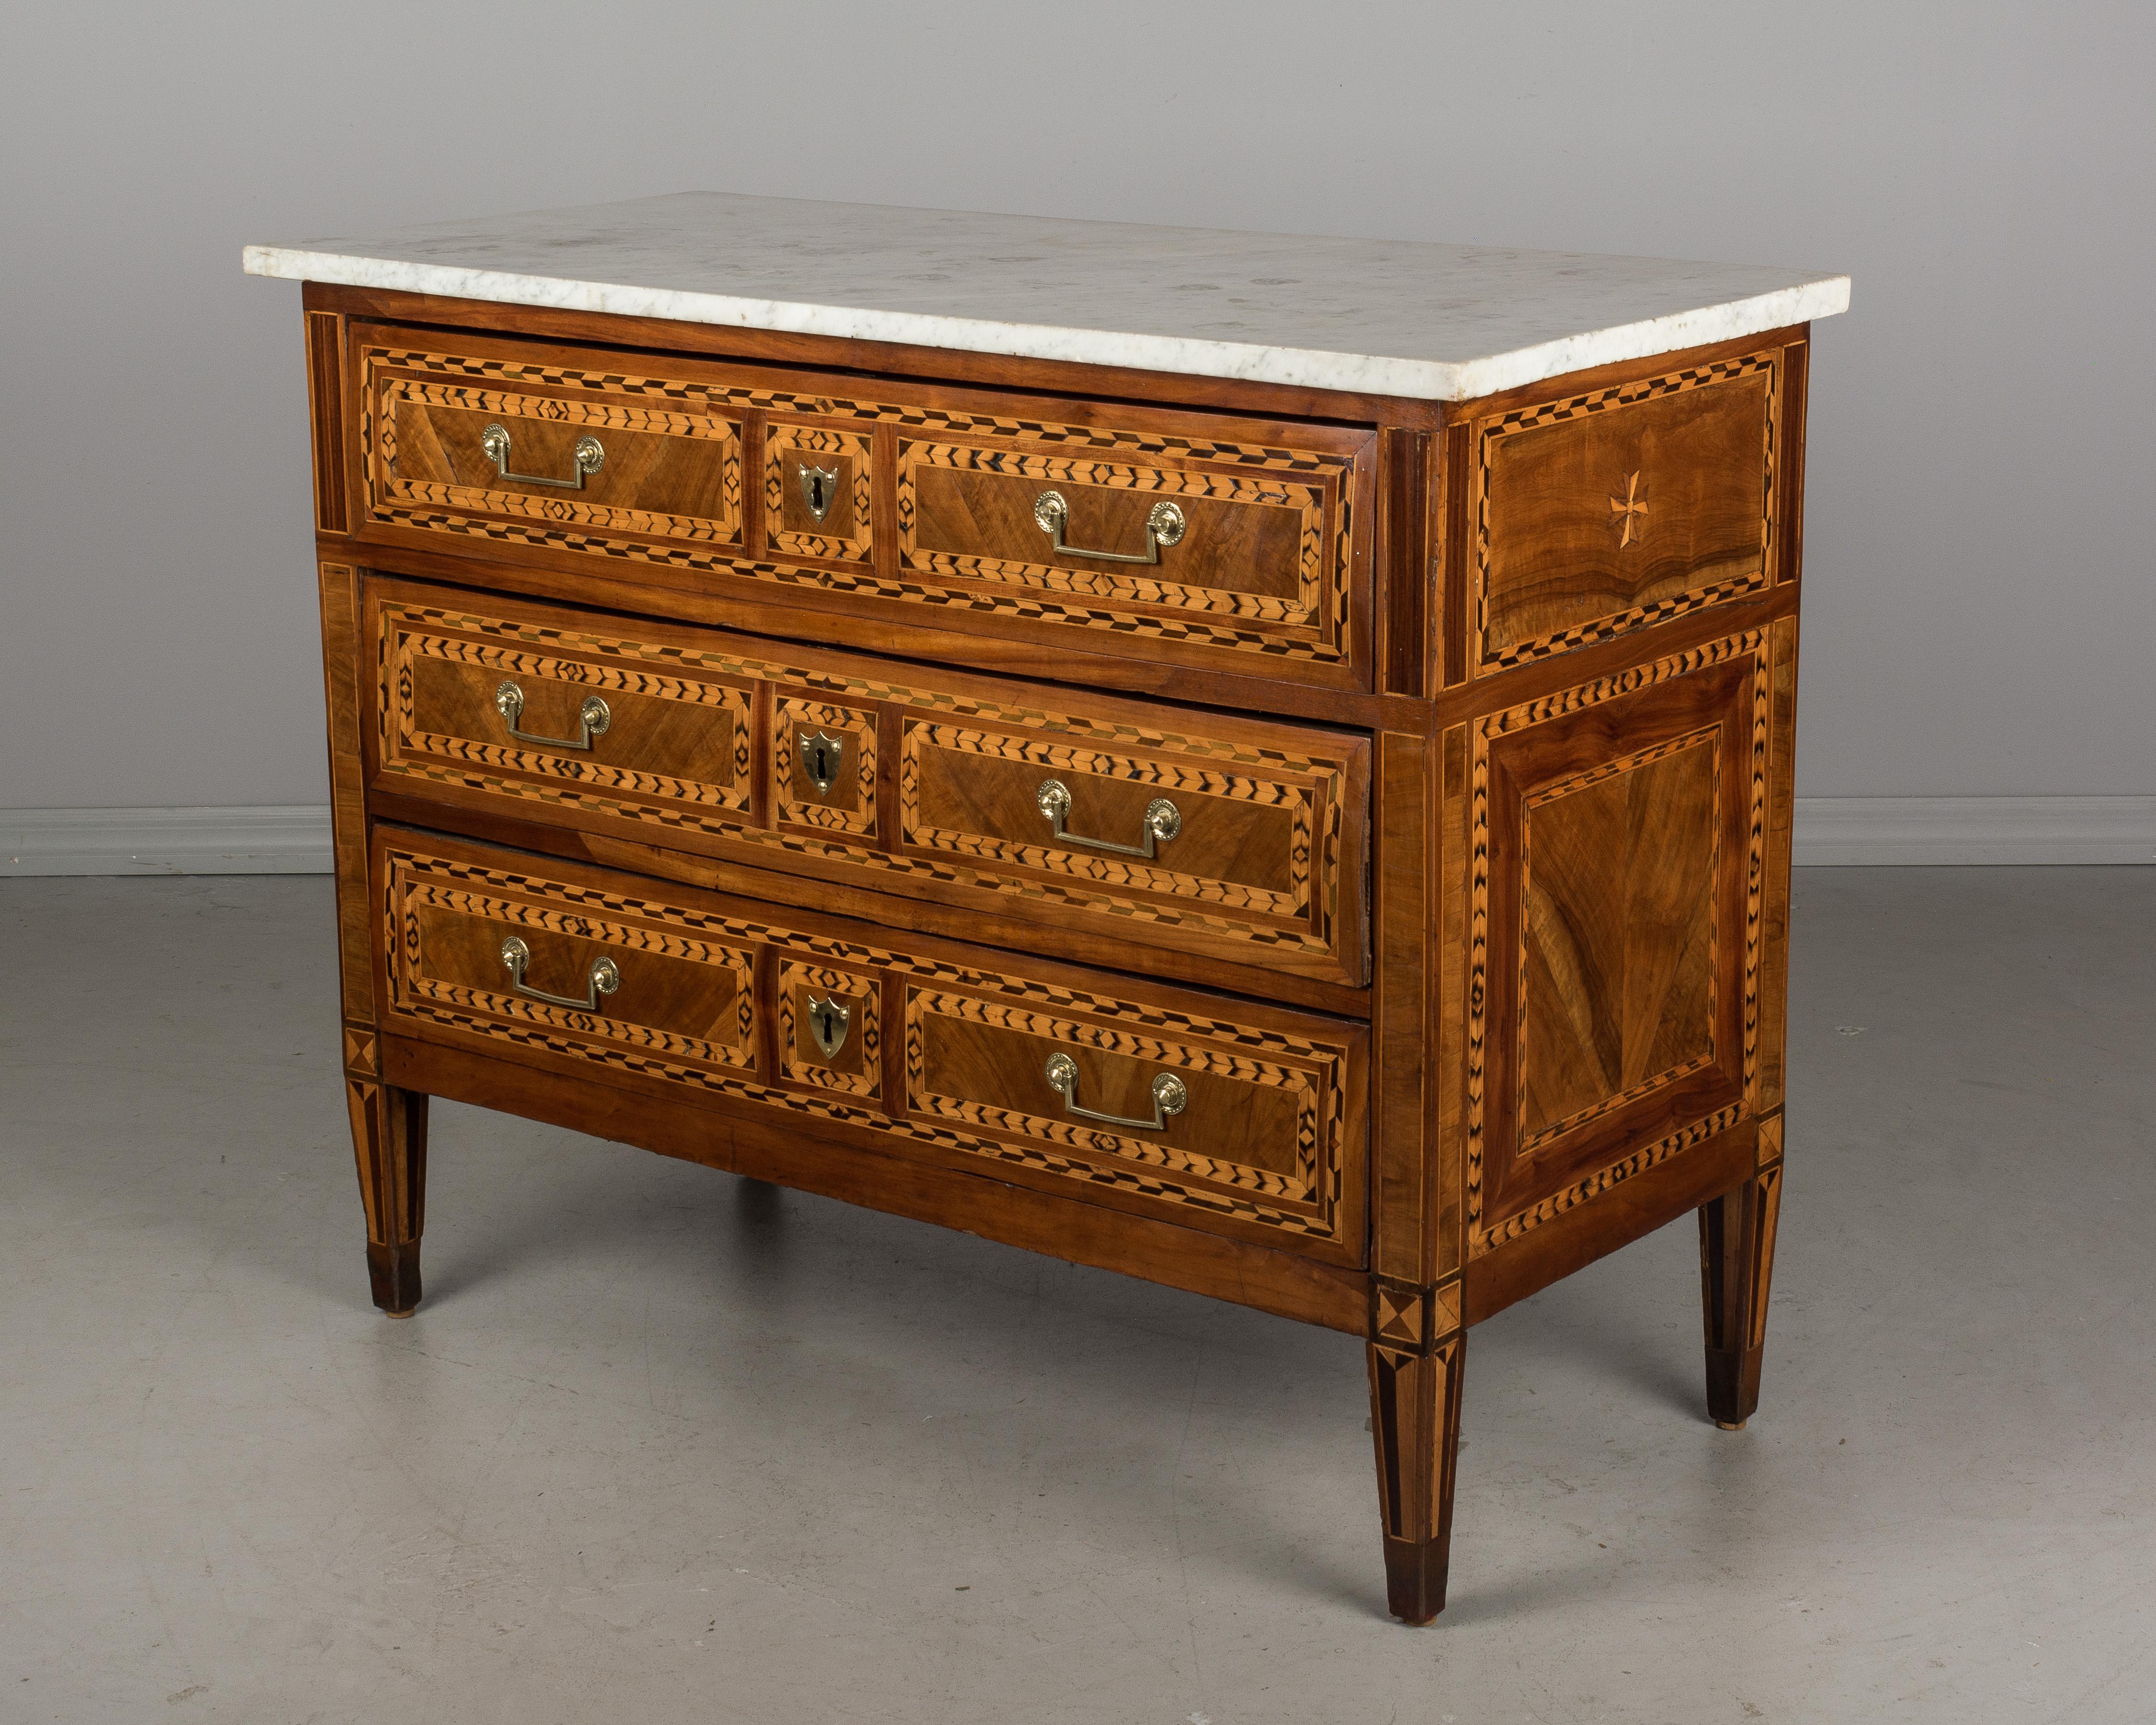 An 18th century Louis XVI marquetry commode from the East of France, beautifully crafted with various wood veneer inlay. French polish finish. Three dovetailed drawers with original brass hardware. Locks are present, there is no key. Original white